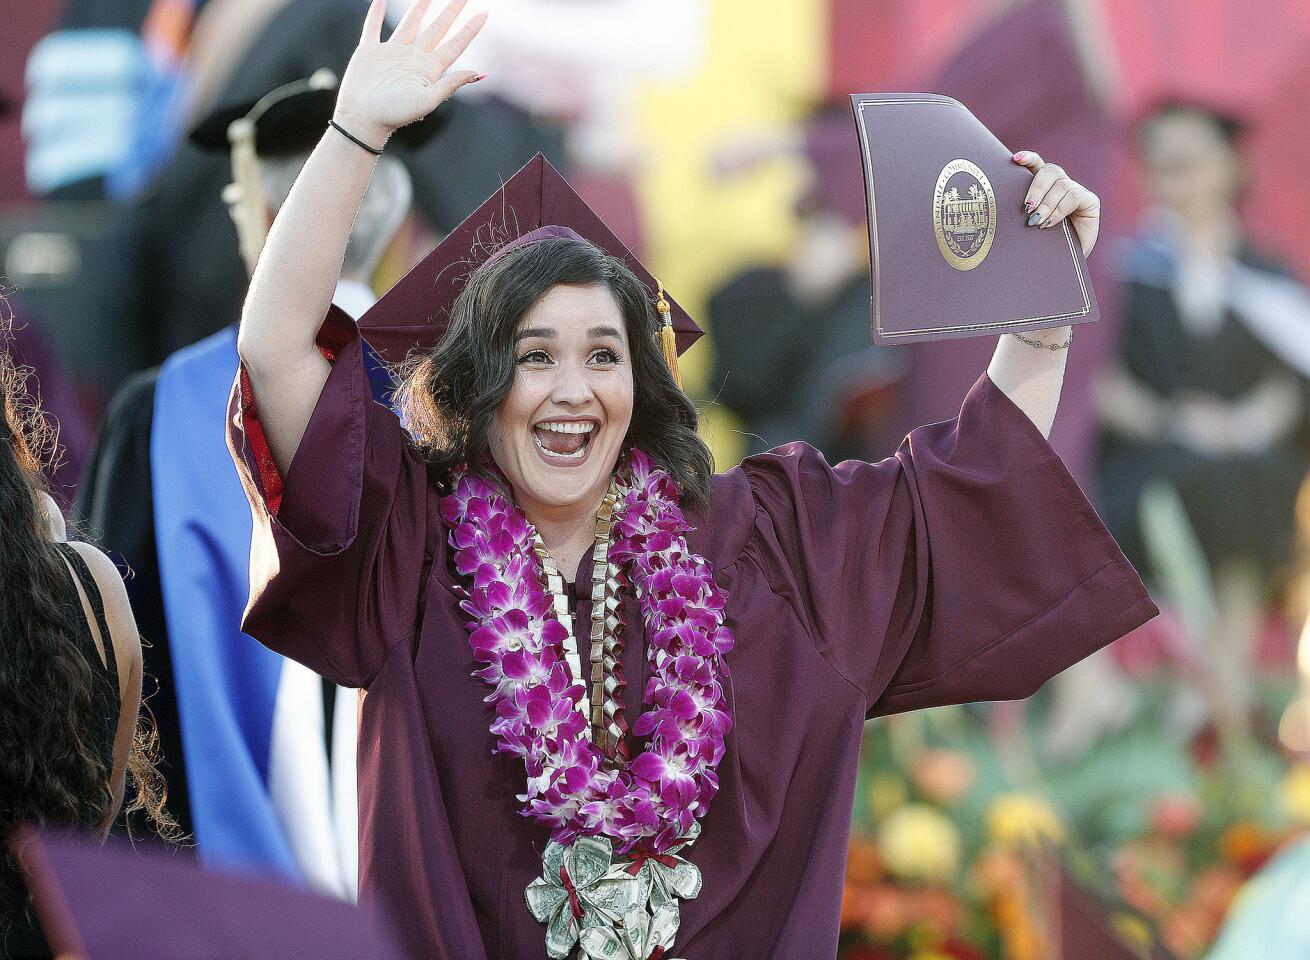 Nancy Diaz, of Arleta, who plans to attend Cal State University Northridge in the fall, waves to family at the 2019 commencement ceremony at Glendale Community College in Glendale on Wednesday, June 12, 2019.